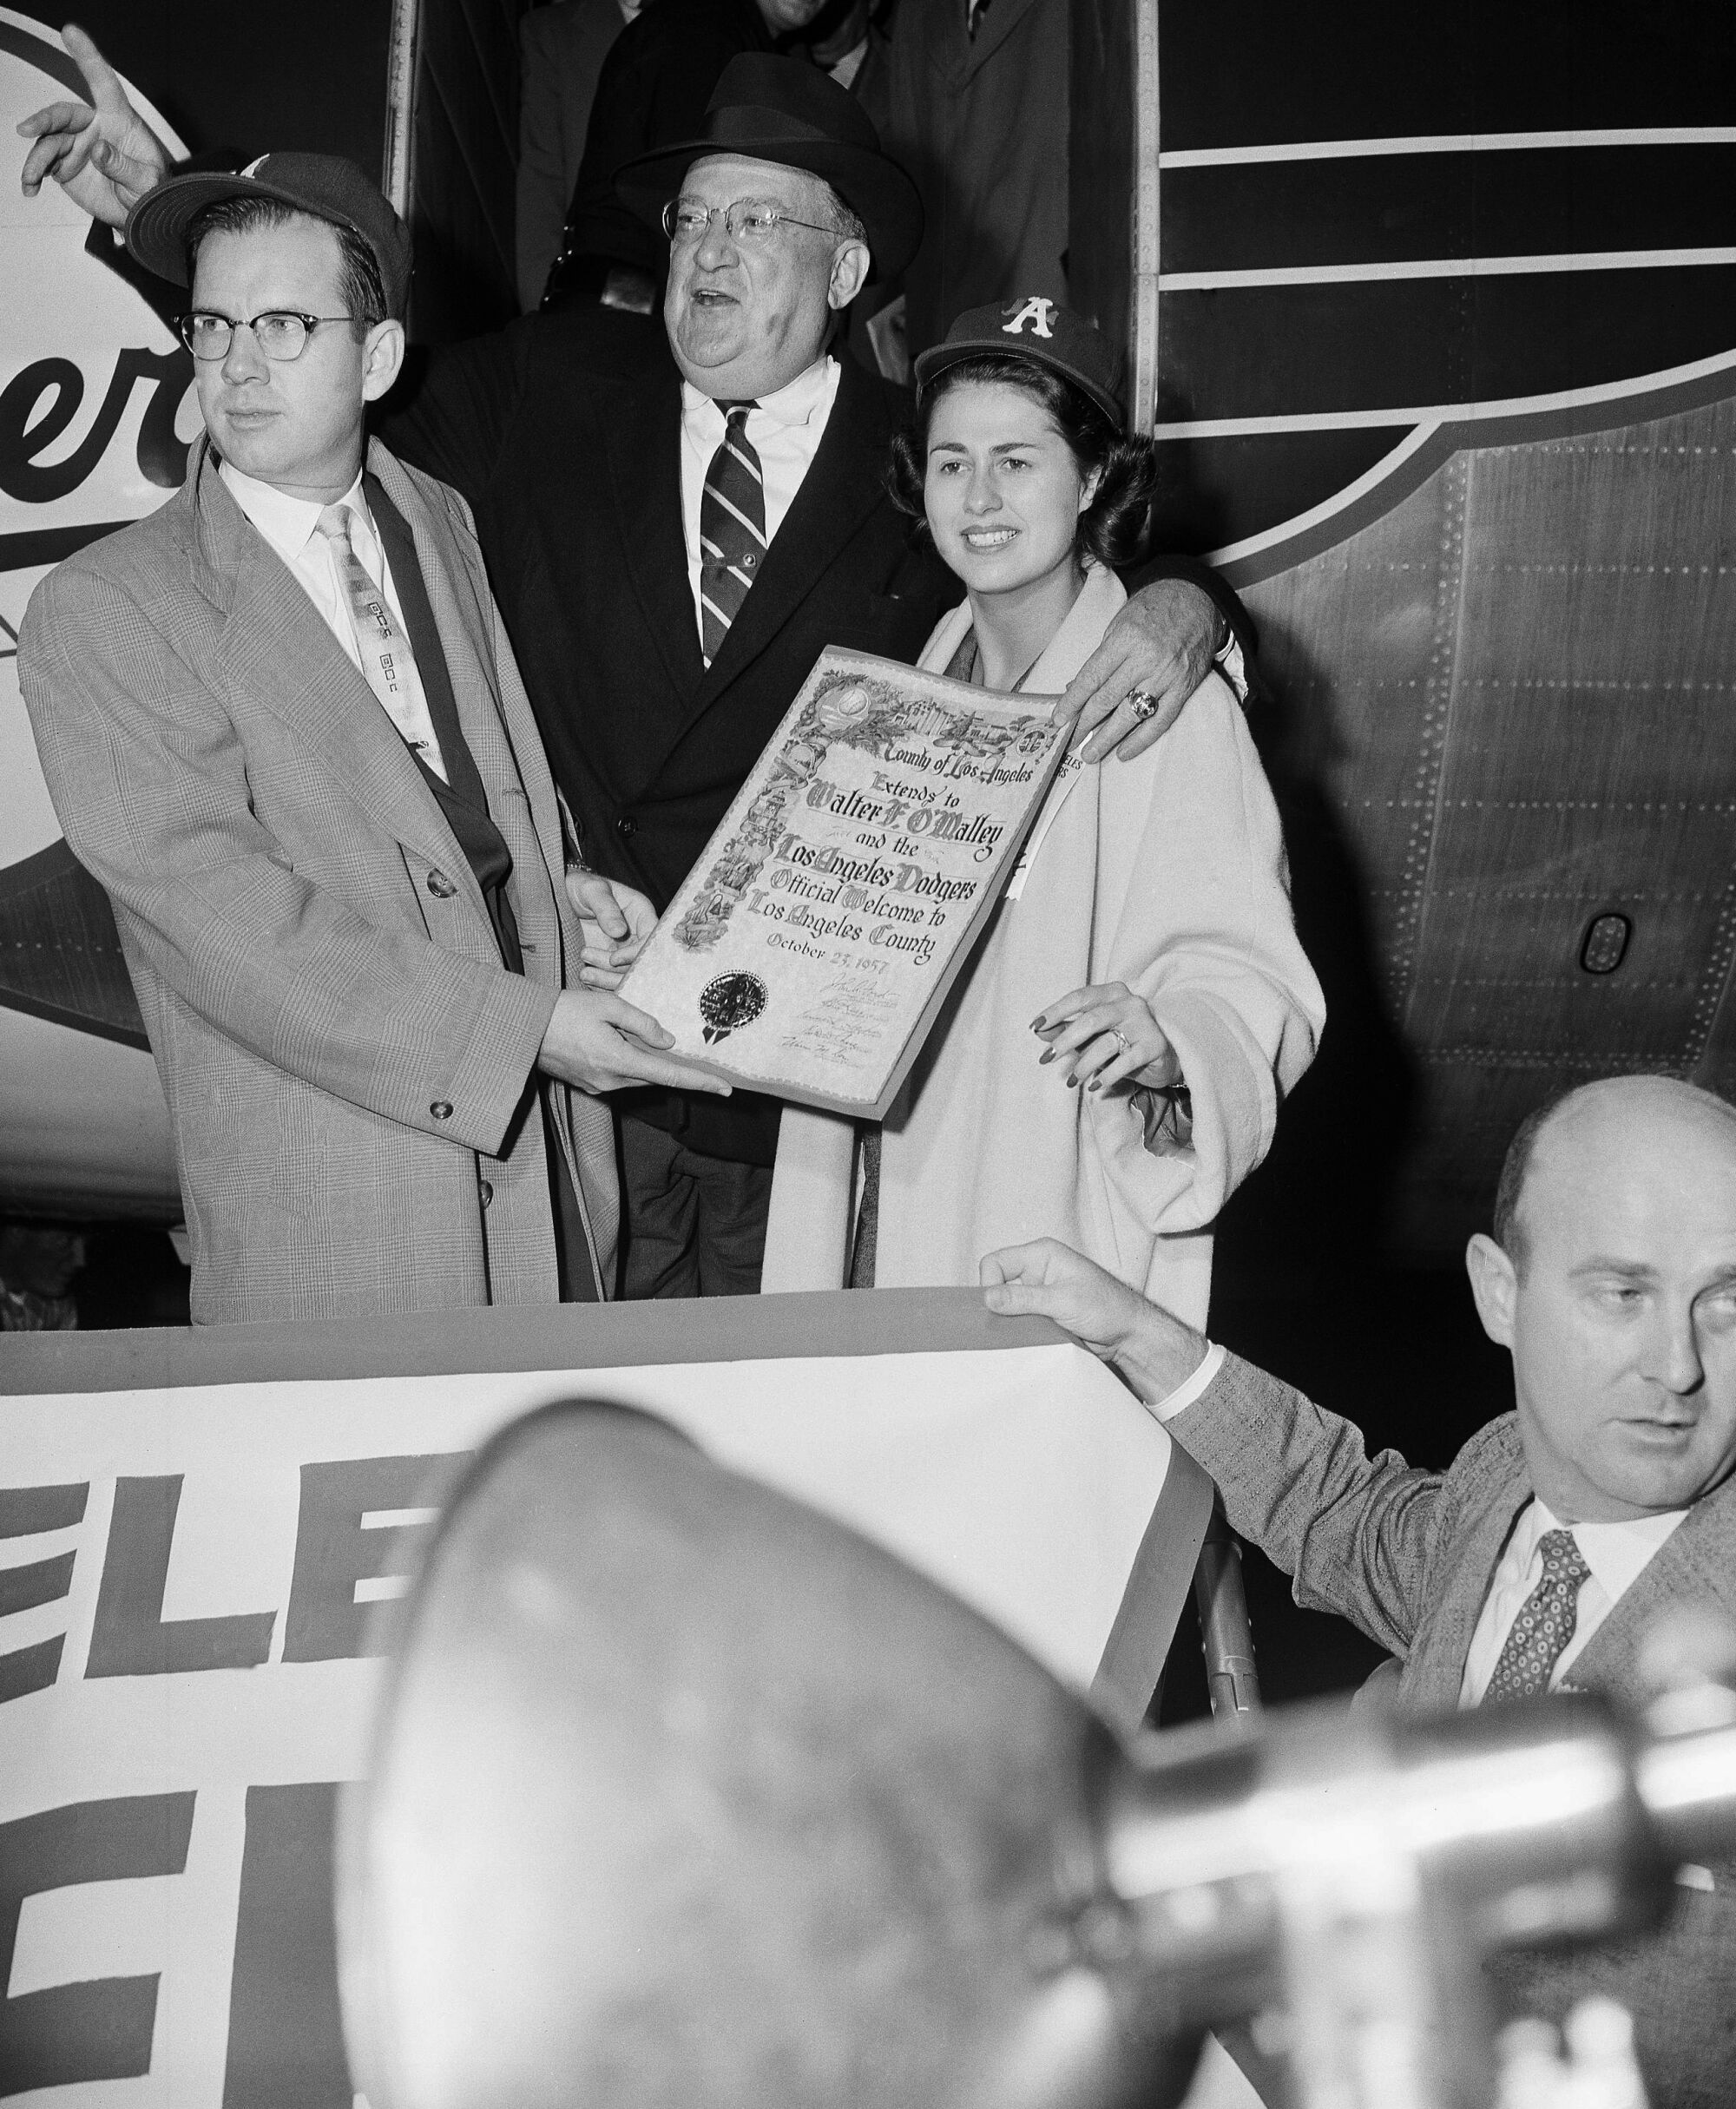 Walter O'Malley stands between Kenneth Hahn and Rosalind Wyman as they hold up a document.